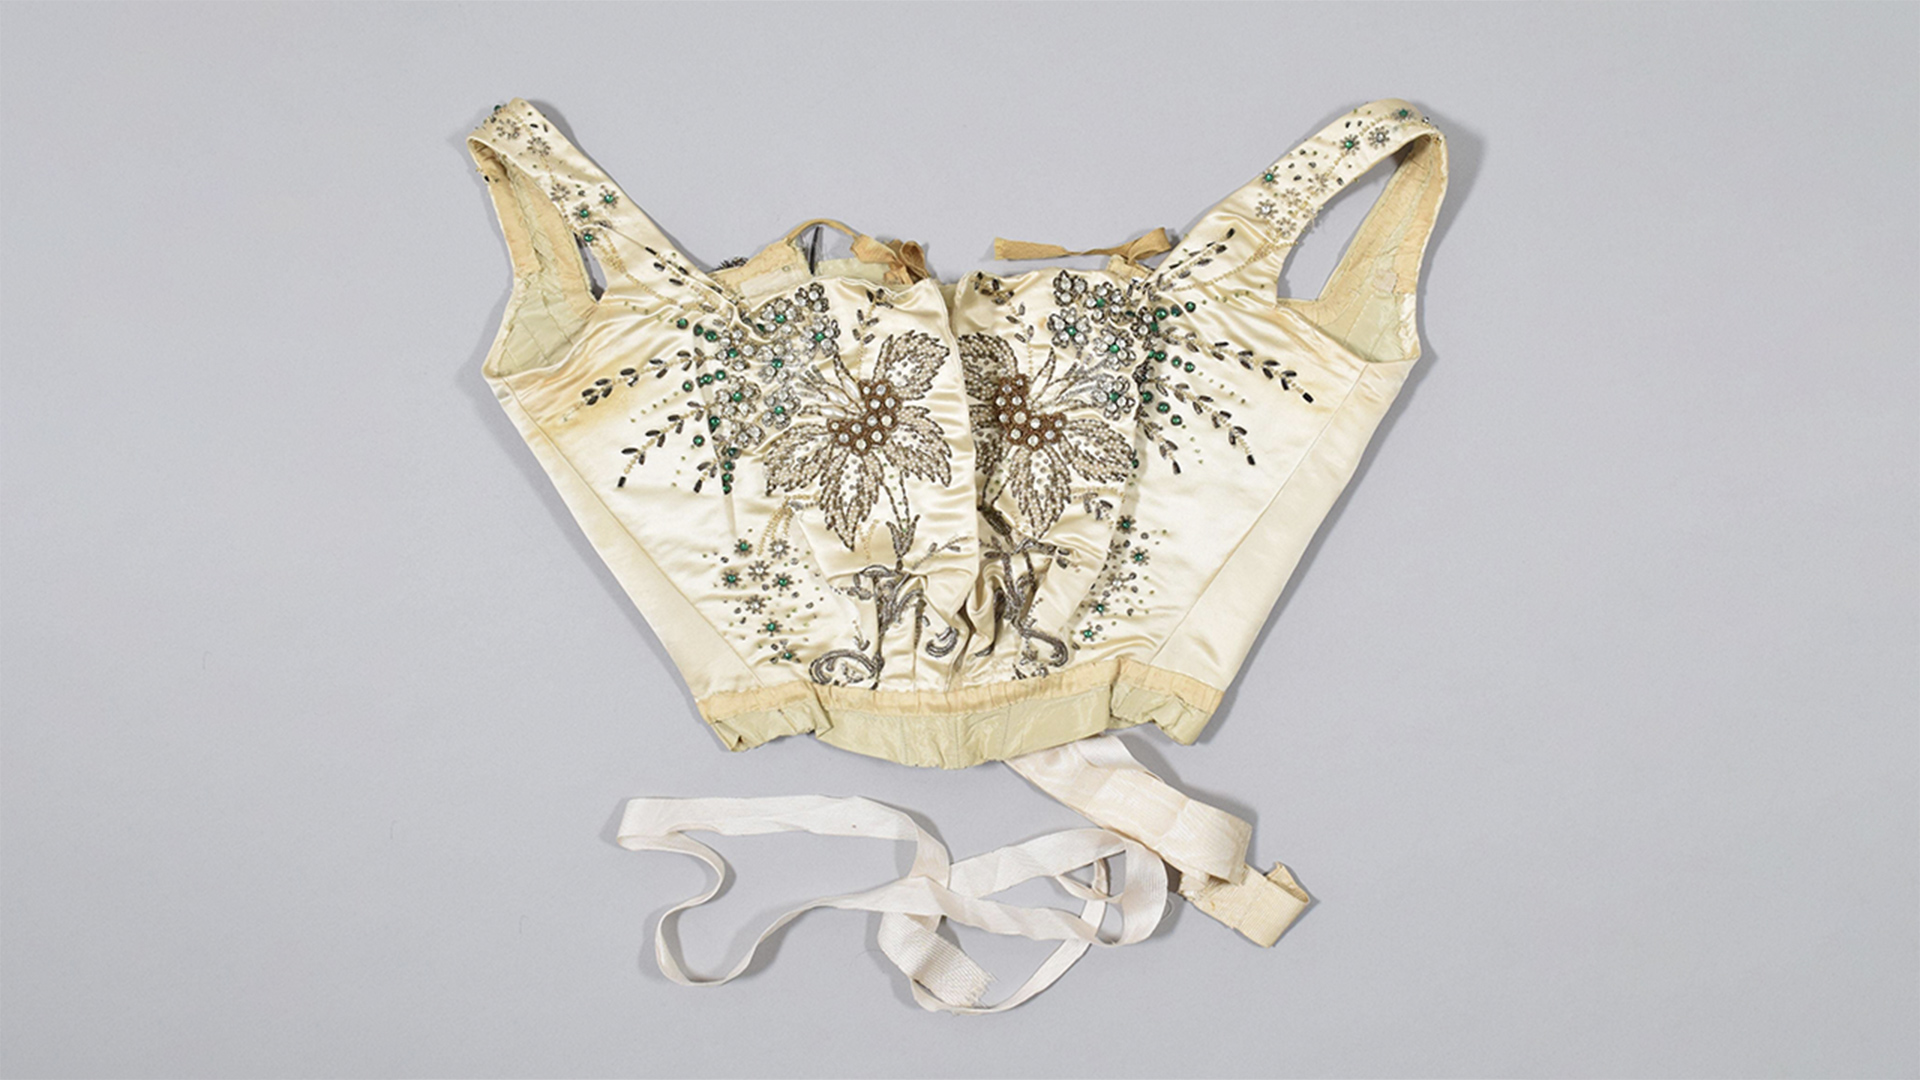 Satin corset from a court dress with embroidered flowers